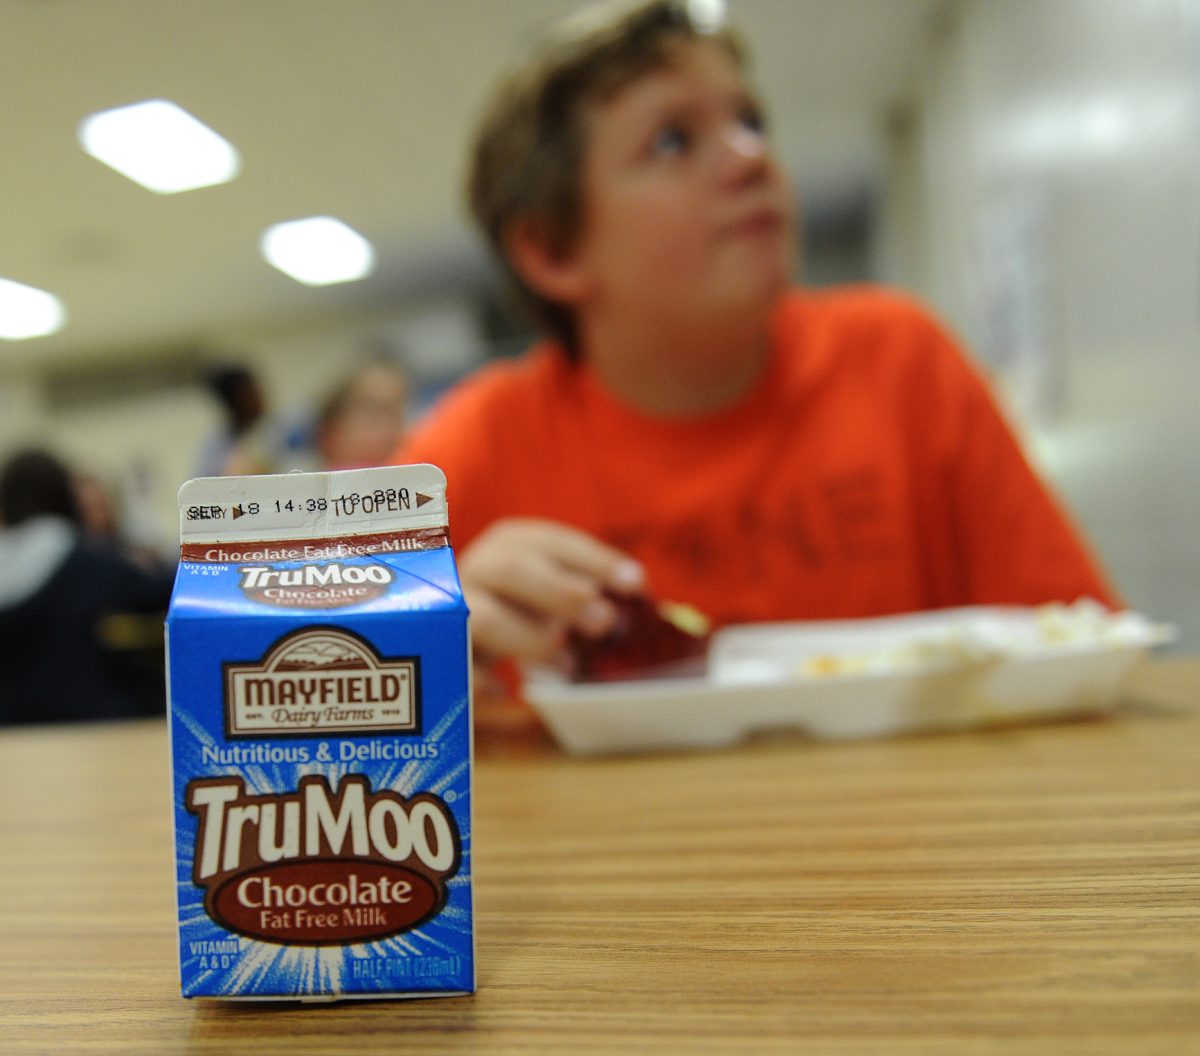 September 6, 2012 - Decatur: This empty carton of chocolate milk sits on the  table as Diego Wren,13, talks to a classmate during lunch at Renfroe Middle School in Decatur on Thursday, September 6, 2012.  While many have fond memories of a childhood chill warmed by hot cocoa or of a thirst slaked by a cold glass, the very notion of the drink is on trial in Decatur. The school board just voted unanimously to consider a parent committees recommendation to ban the sweet, sugary drink from school cafeterias. Their argument: the calories outweigh the nutritional benefits.  JOHNNY CRAWFORD /JCRAWFORD@AJC.COM